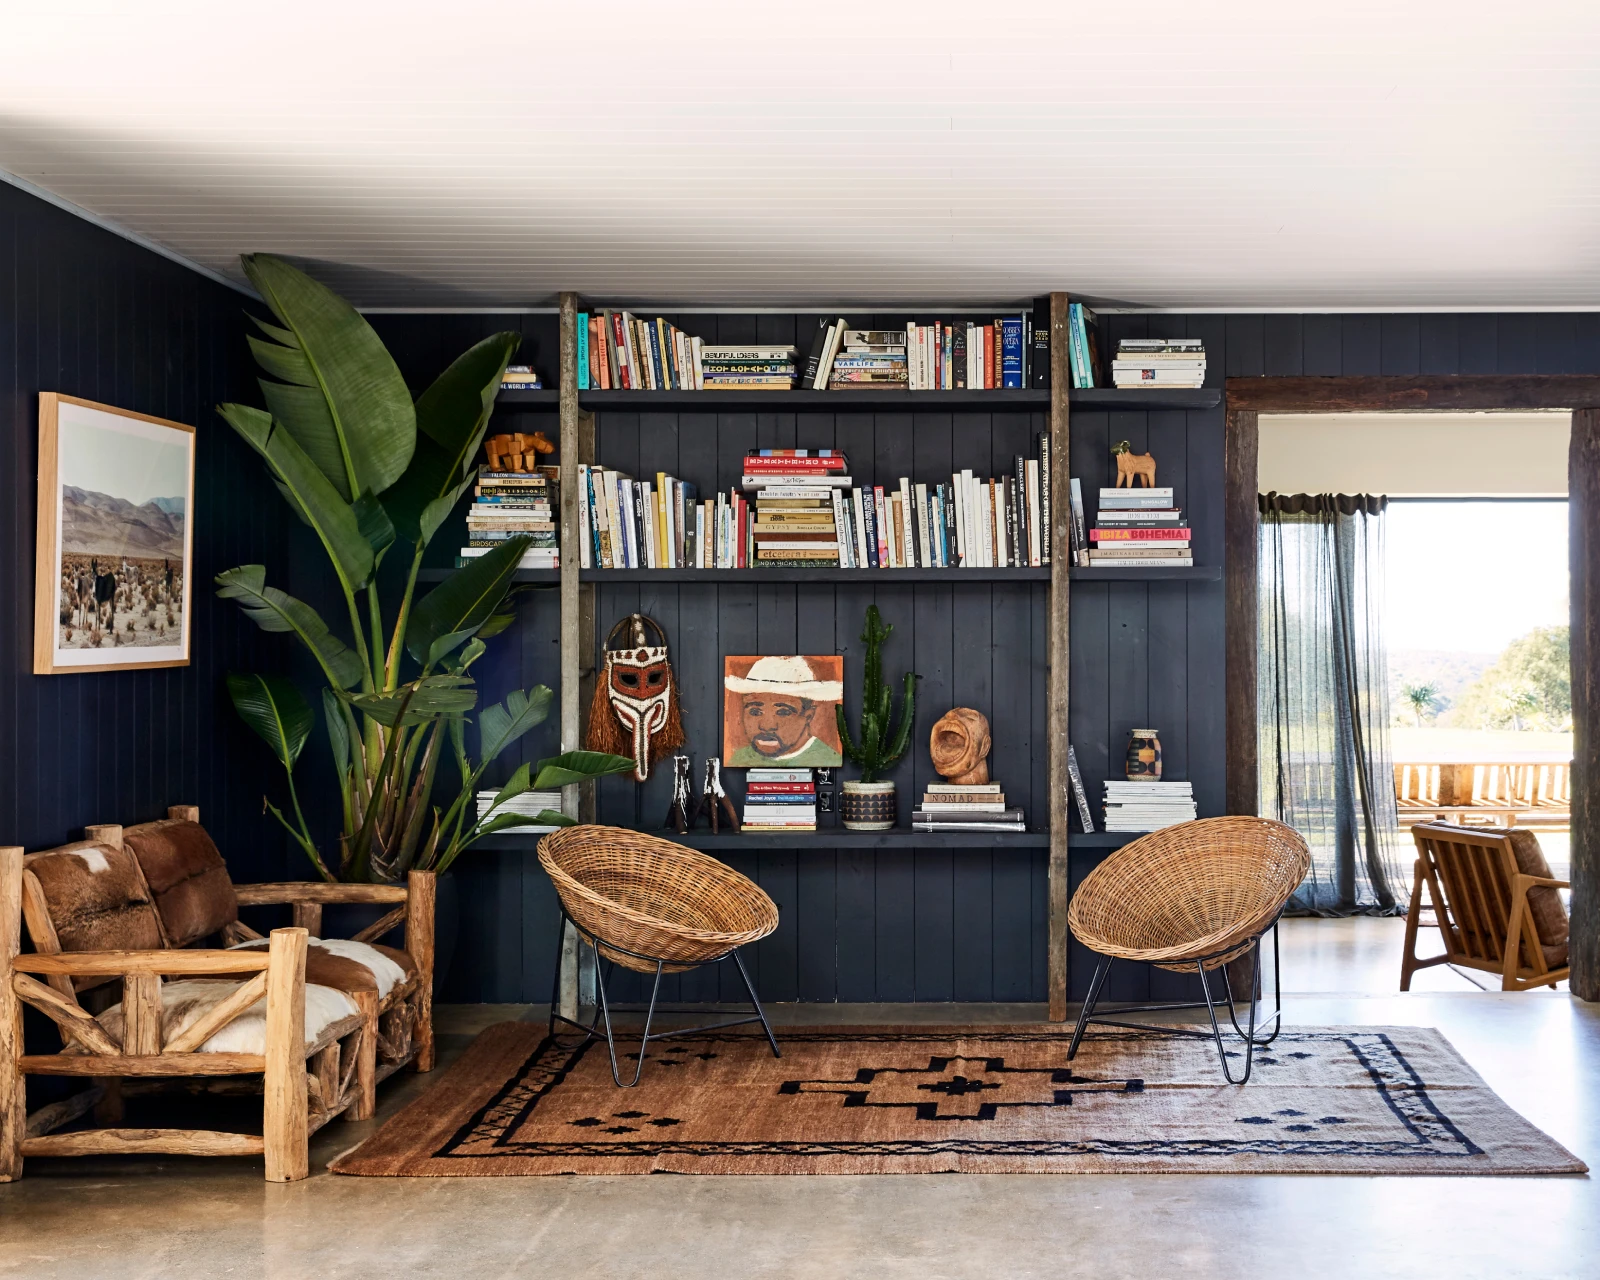 Living room interior with Domino coloured walls and aged wood book shelves